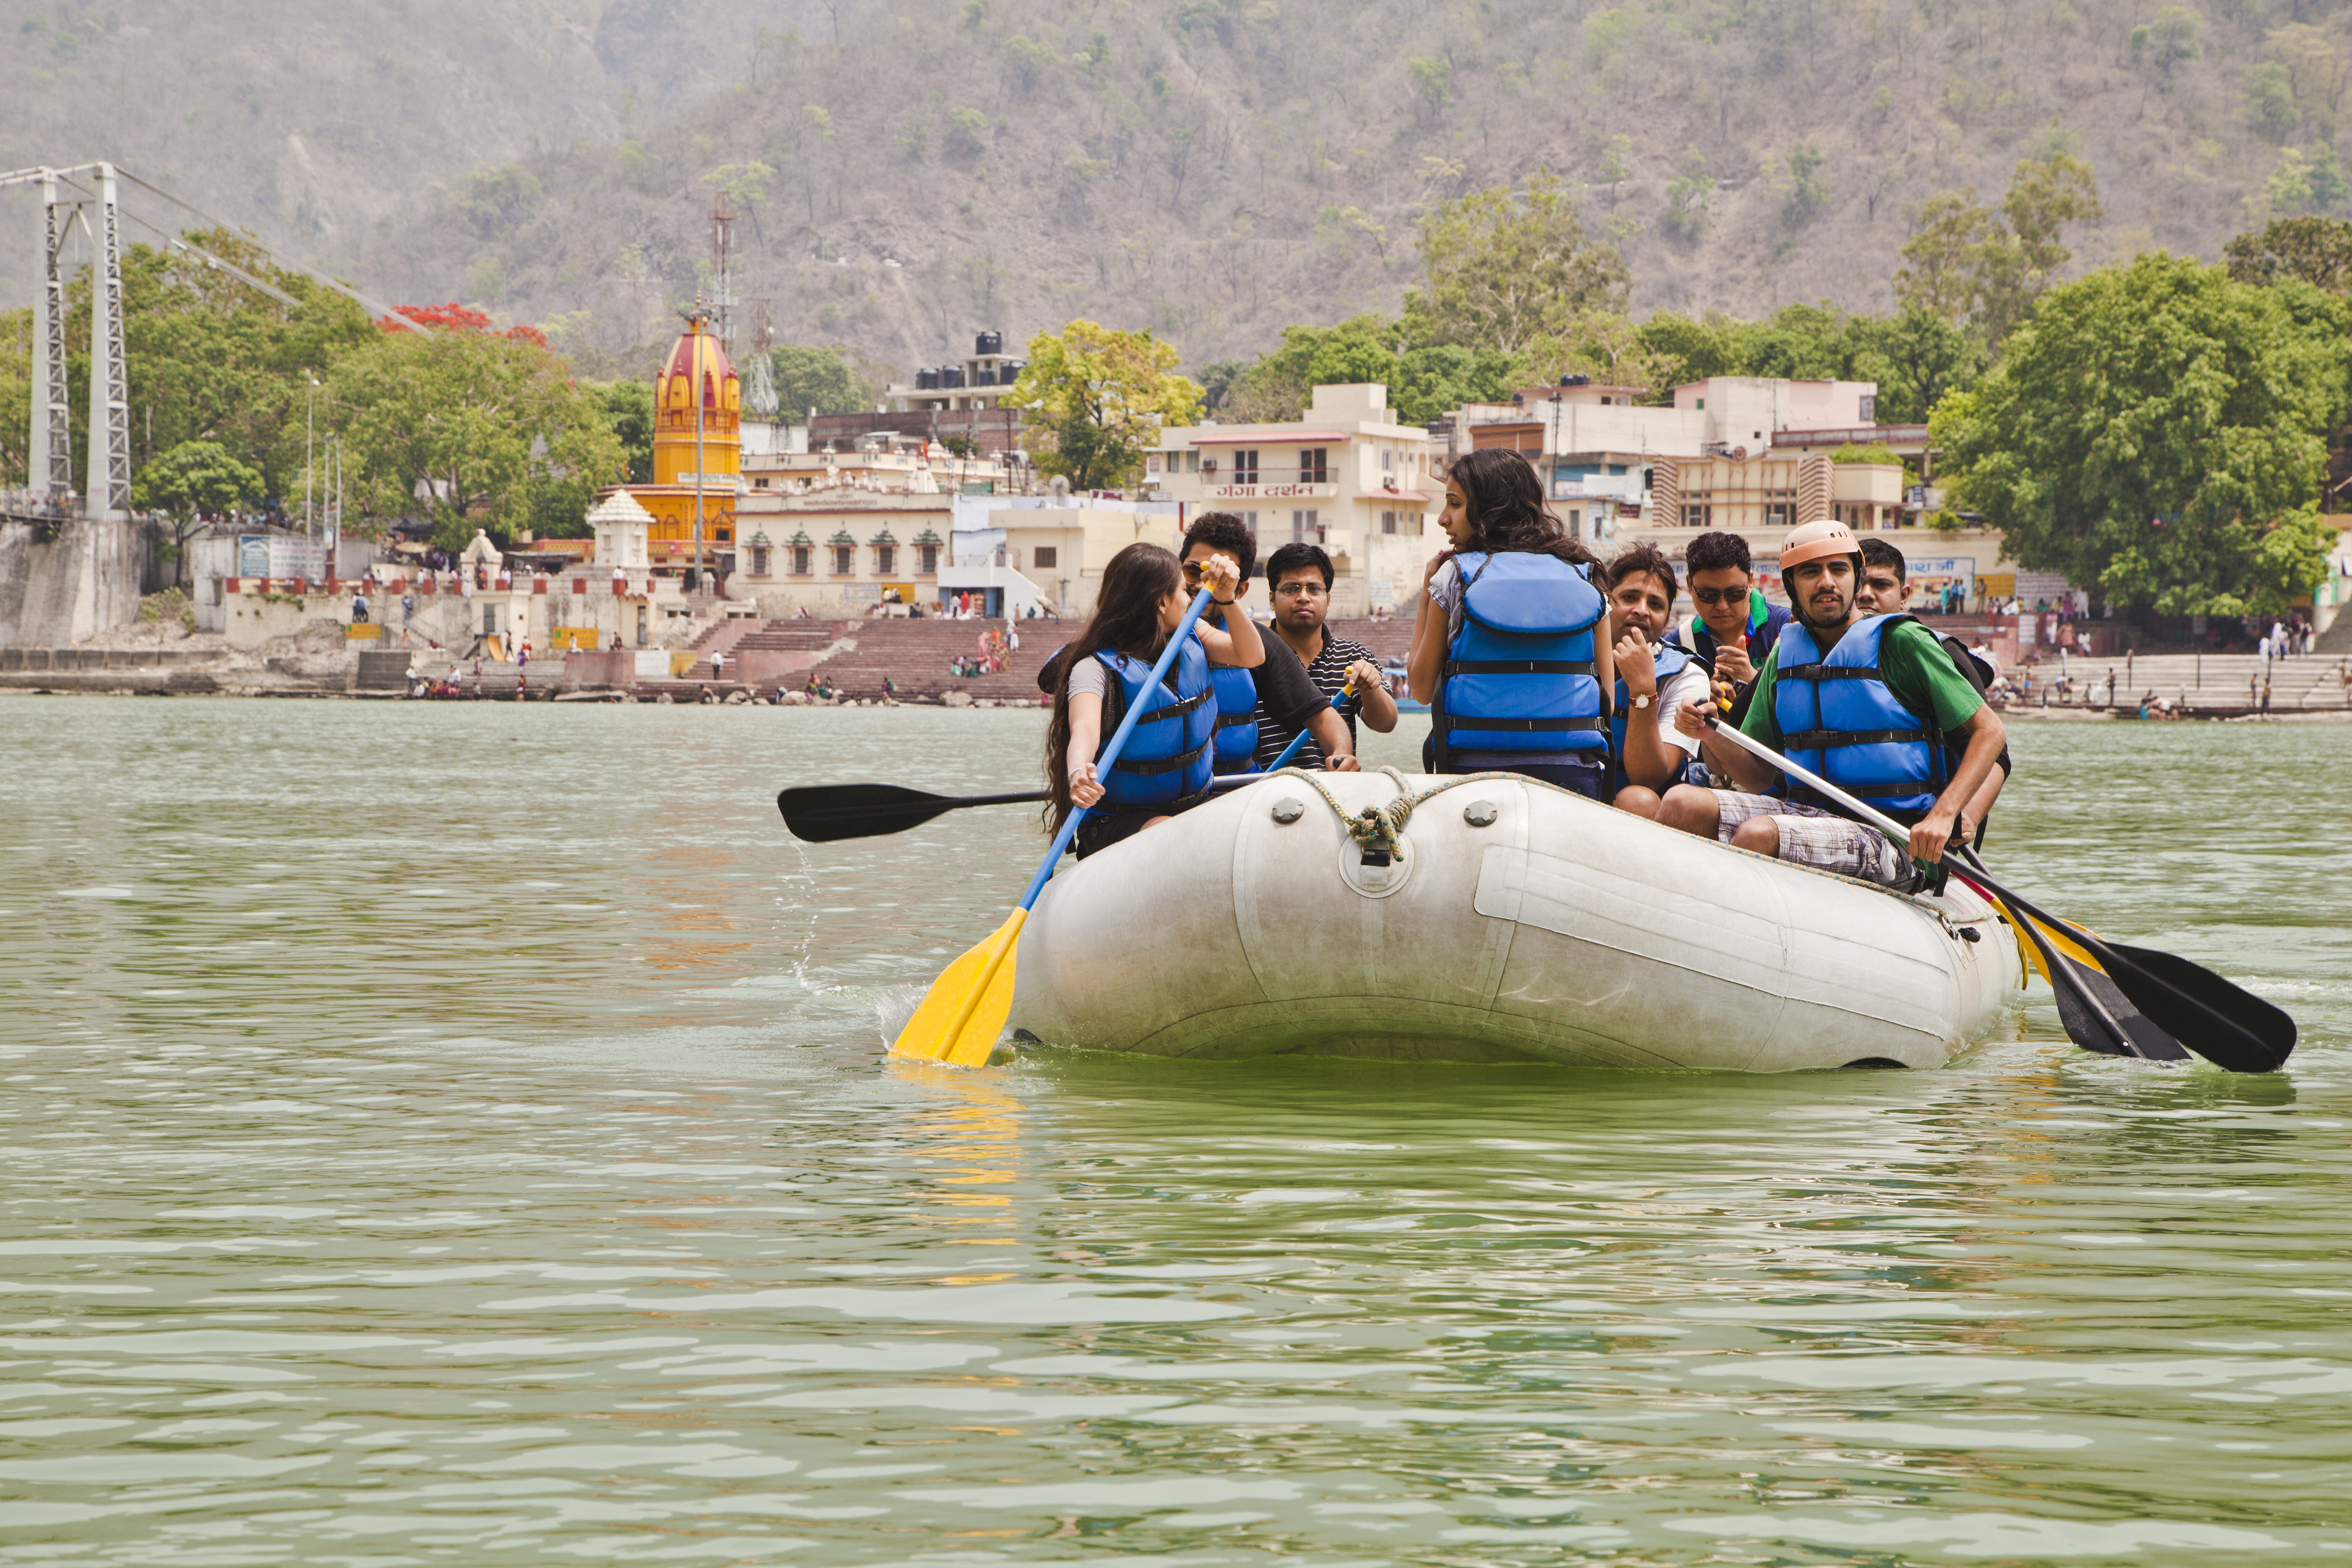 People rafting in Ganges River, Rishikesh, Uttarakhand, India. (Photo by: Exotica.im/UIG via Getty Images)